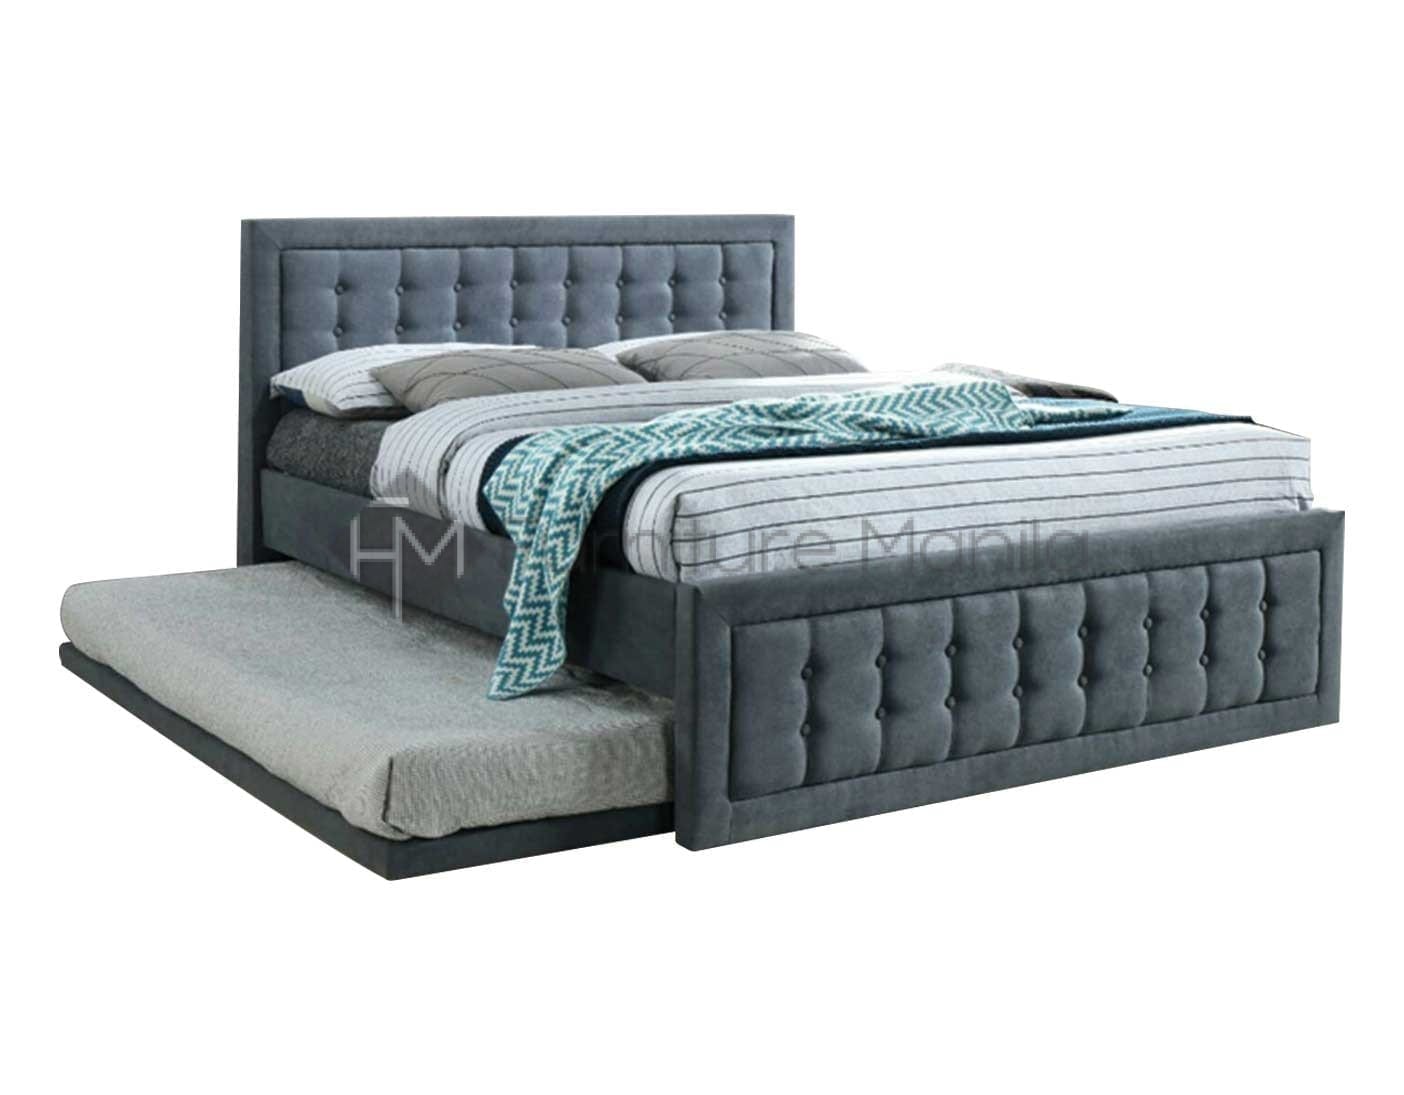 Divan Queen Bed Frame With Pull Out, Bed Frame With Pull Out Drawers